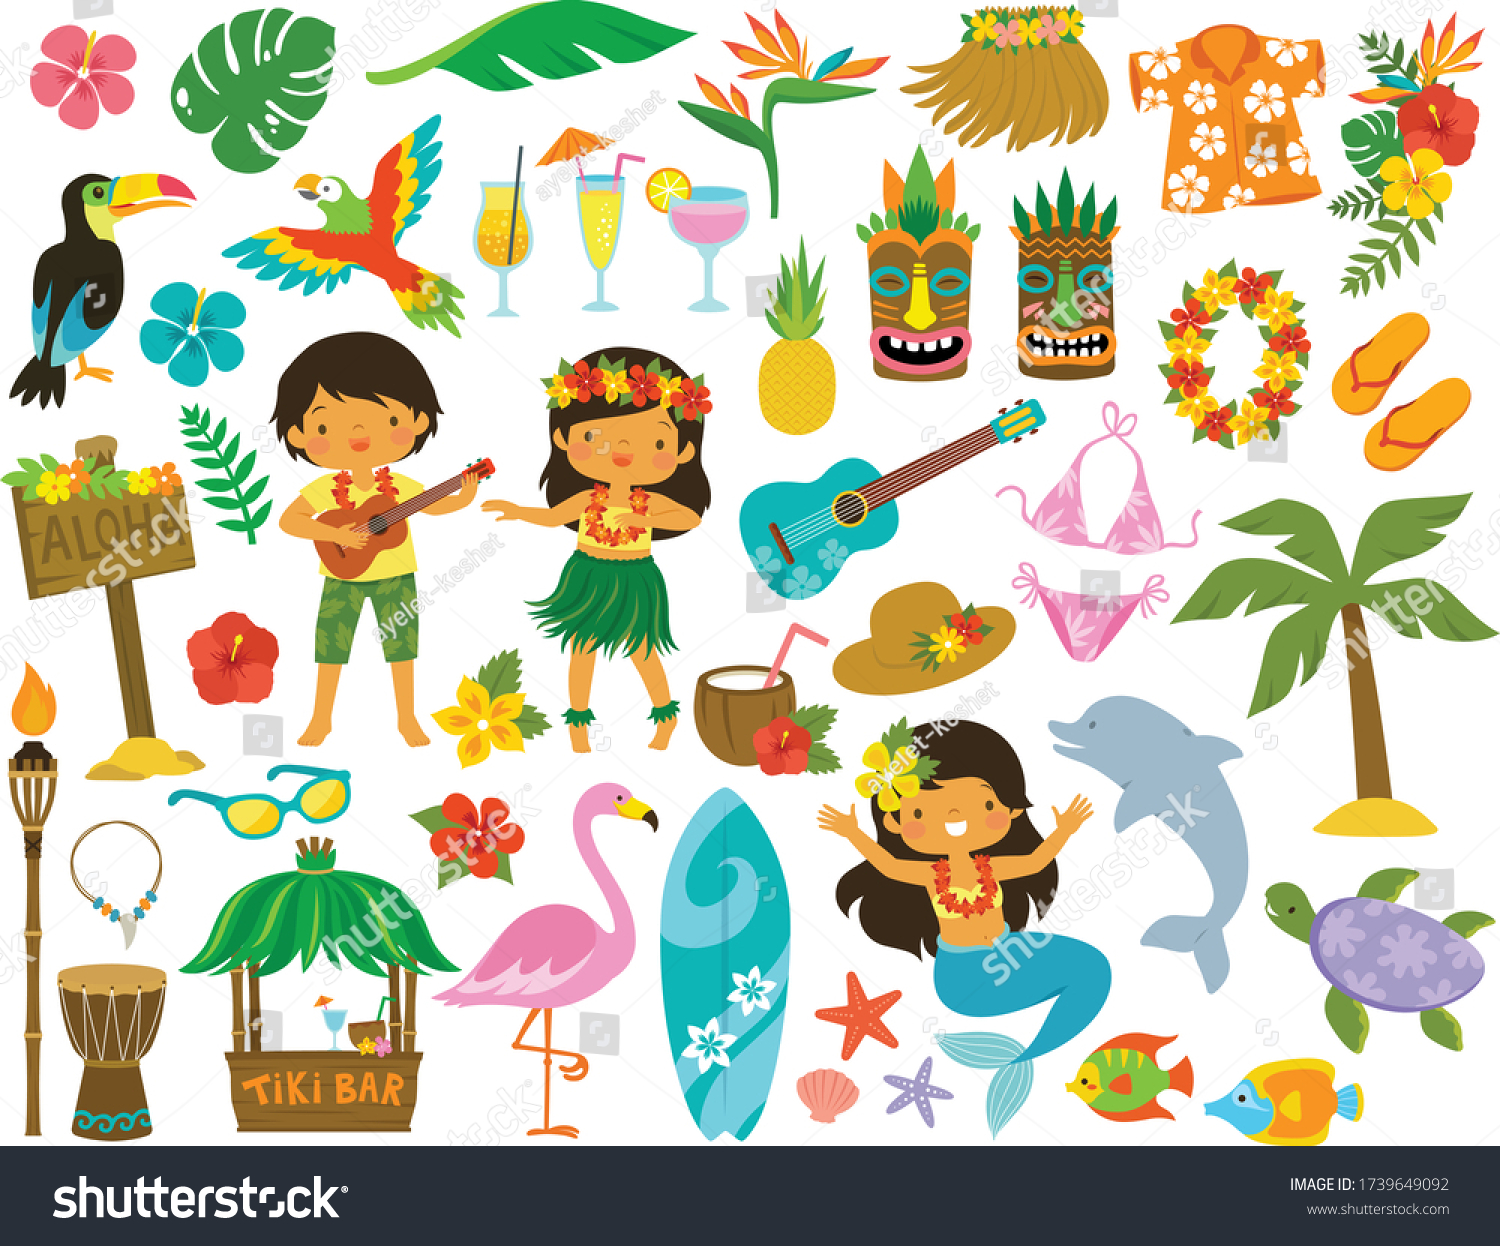 SVG of Tropical clipart set. Hawaii, beach and summer related items.  svg